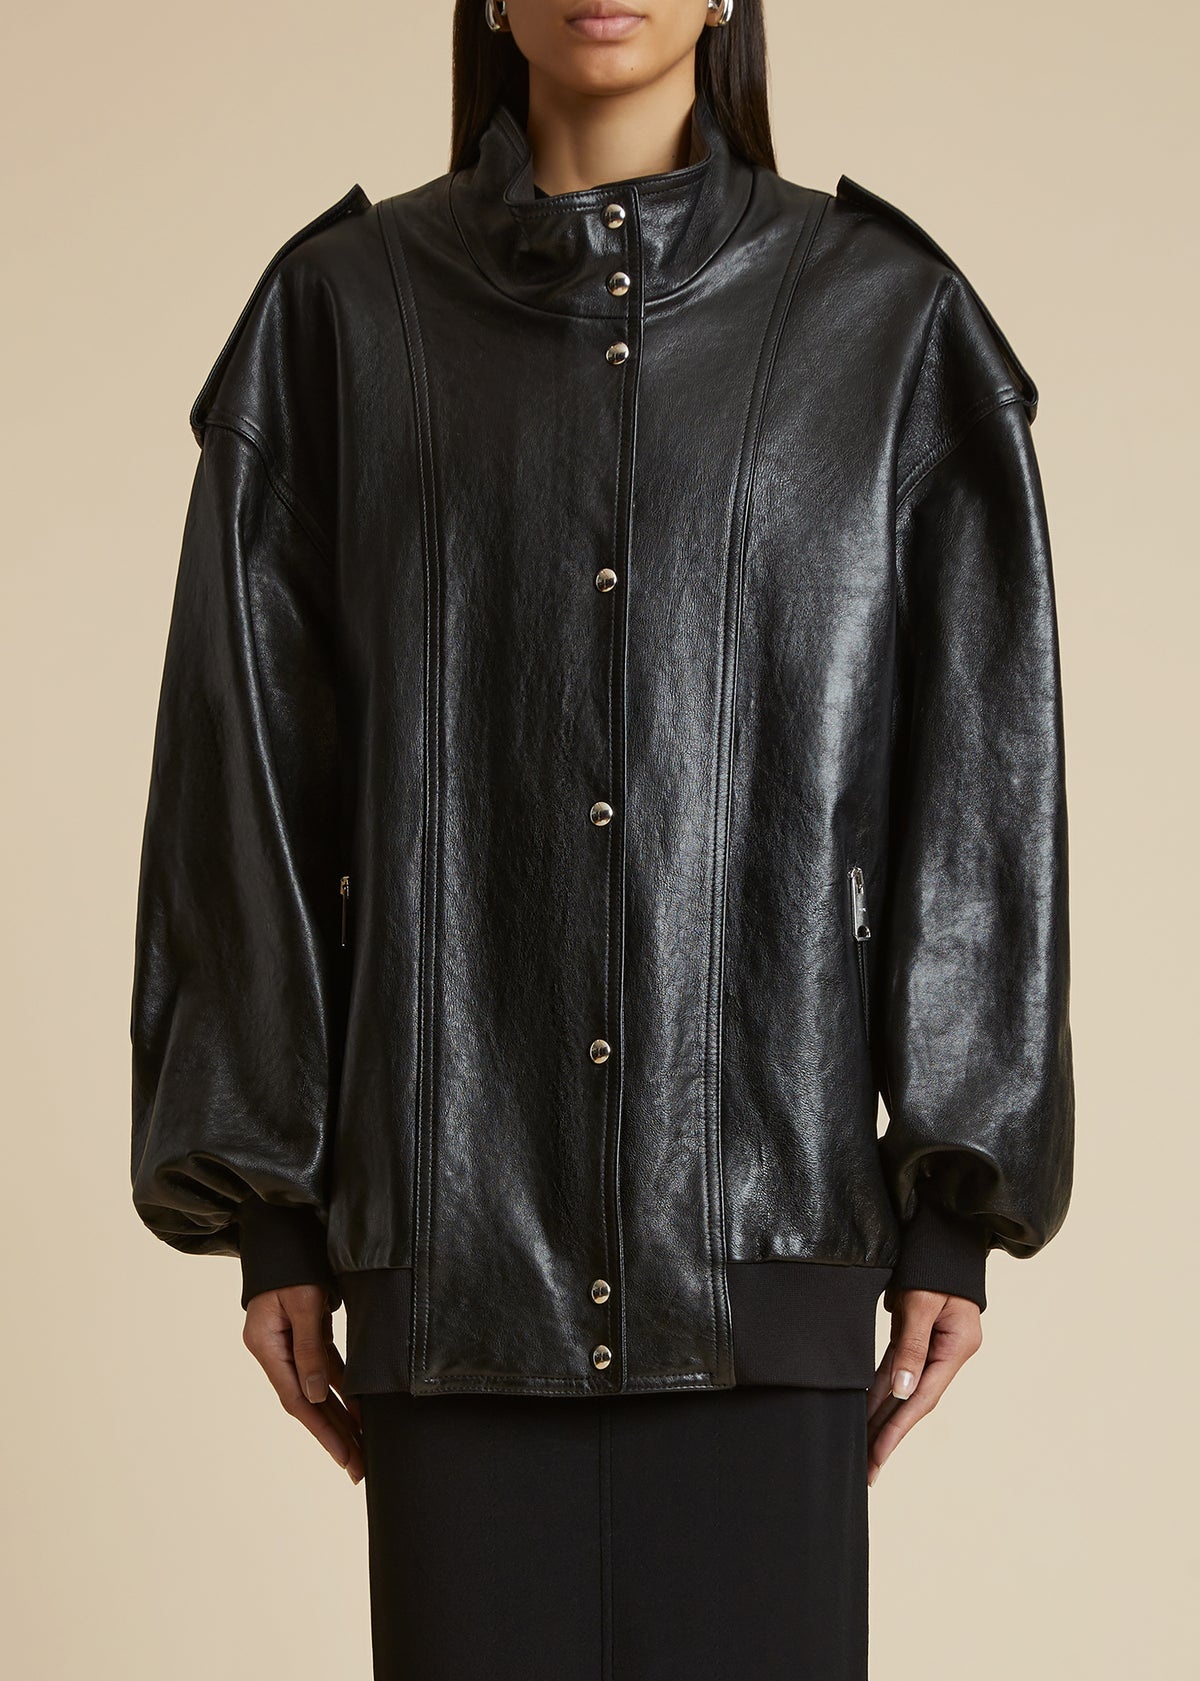 The Farris Jacket in Black Leather - 2